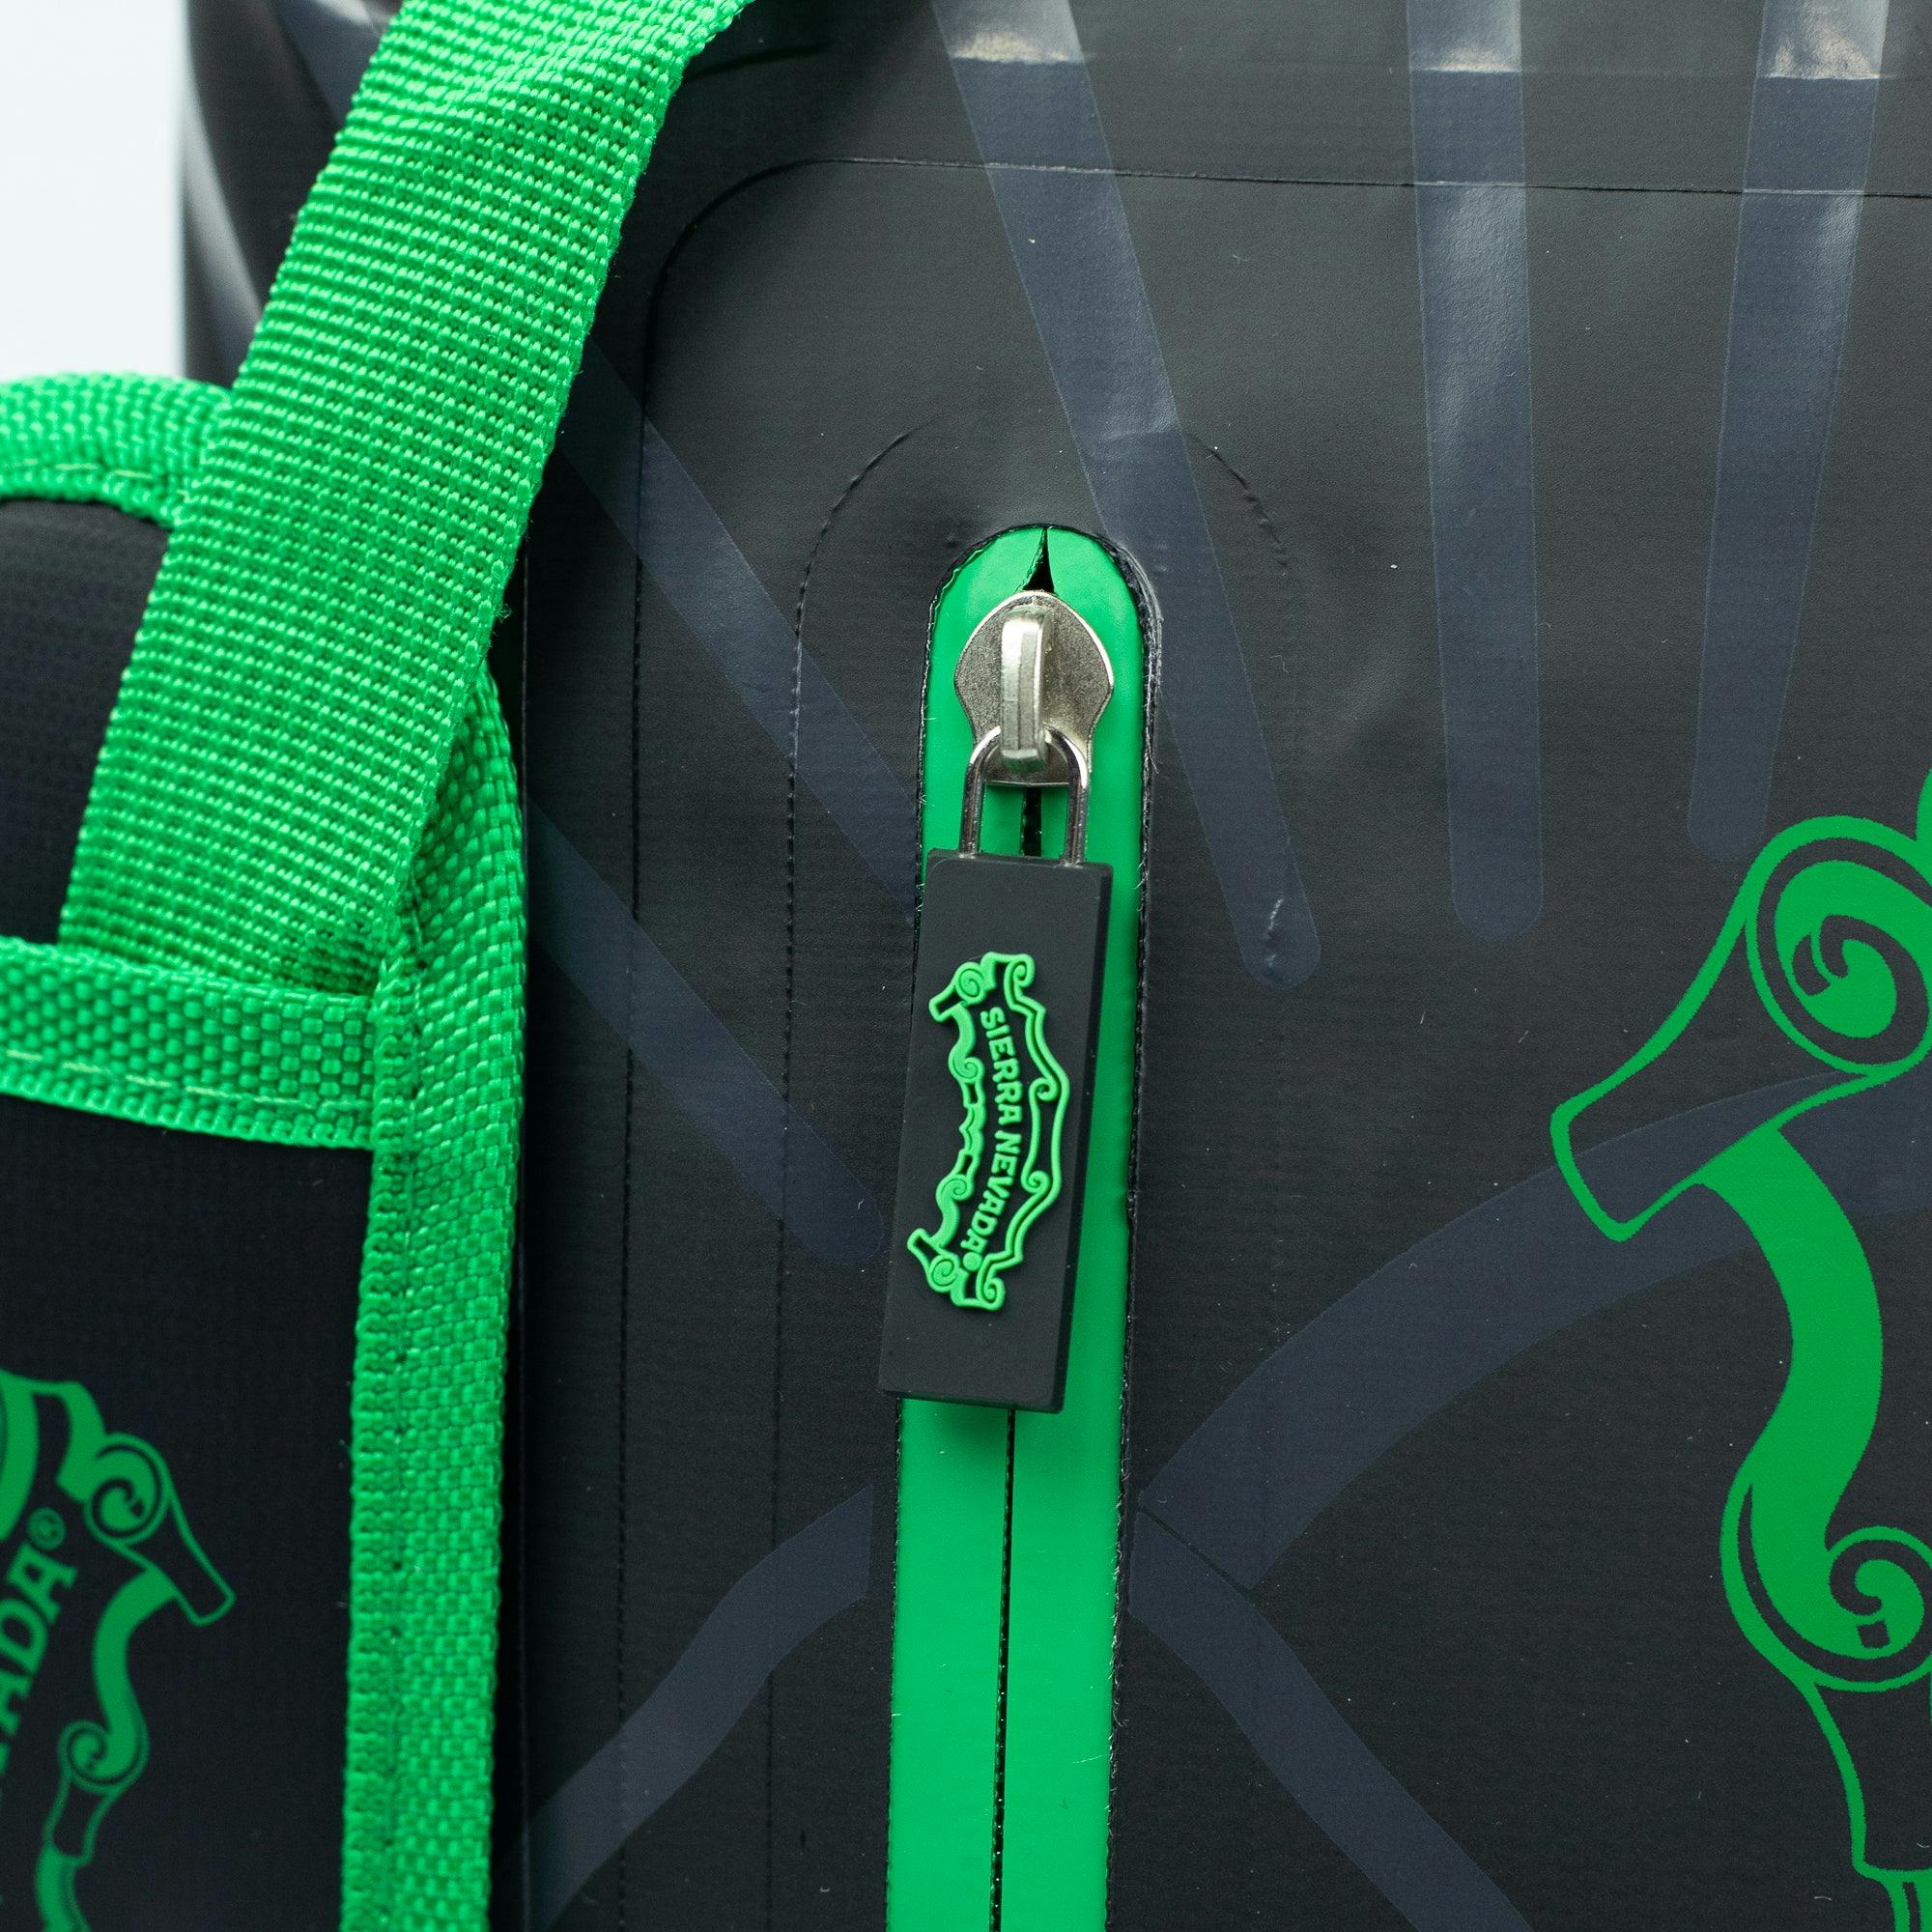 Sierra Nevada Dry Bag - up close view of the rubberized zipper pull featuring the Sierra scroll logo